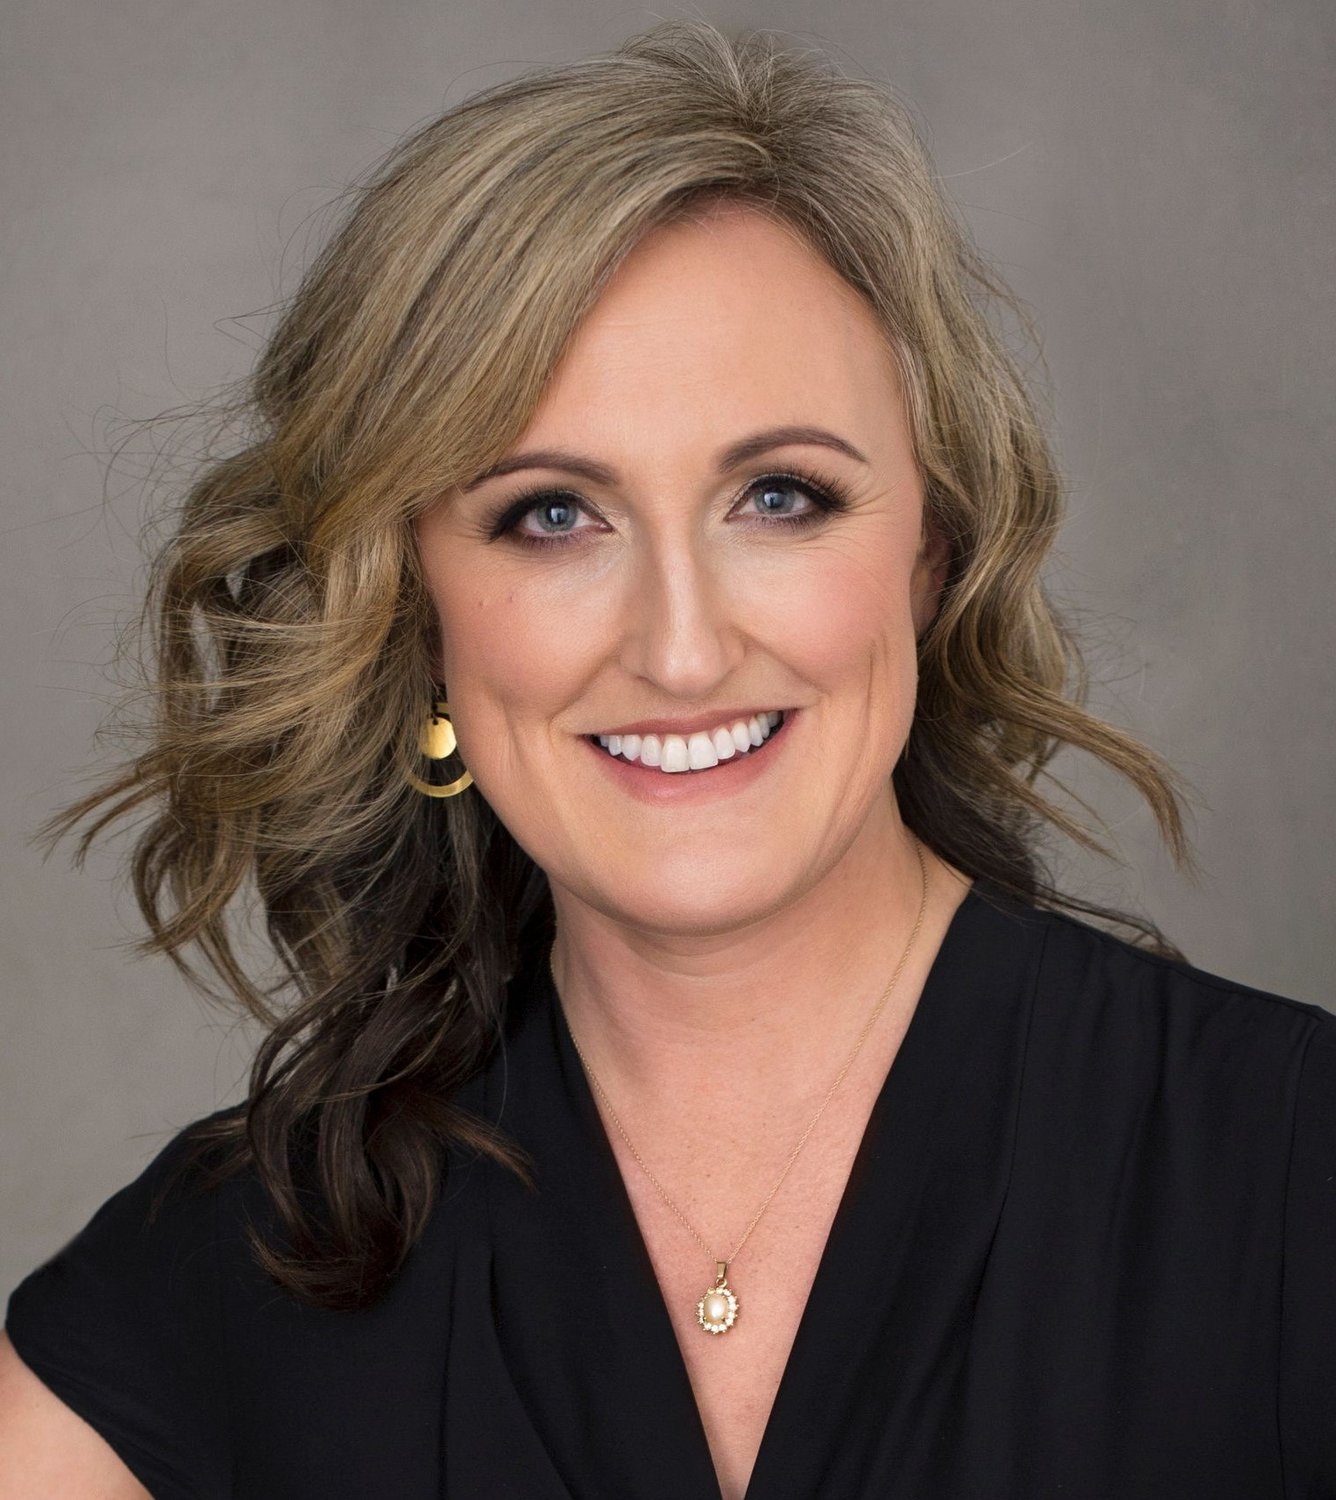 Kristy Woodford, CEO of Holistic Home Group